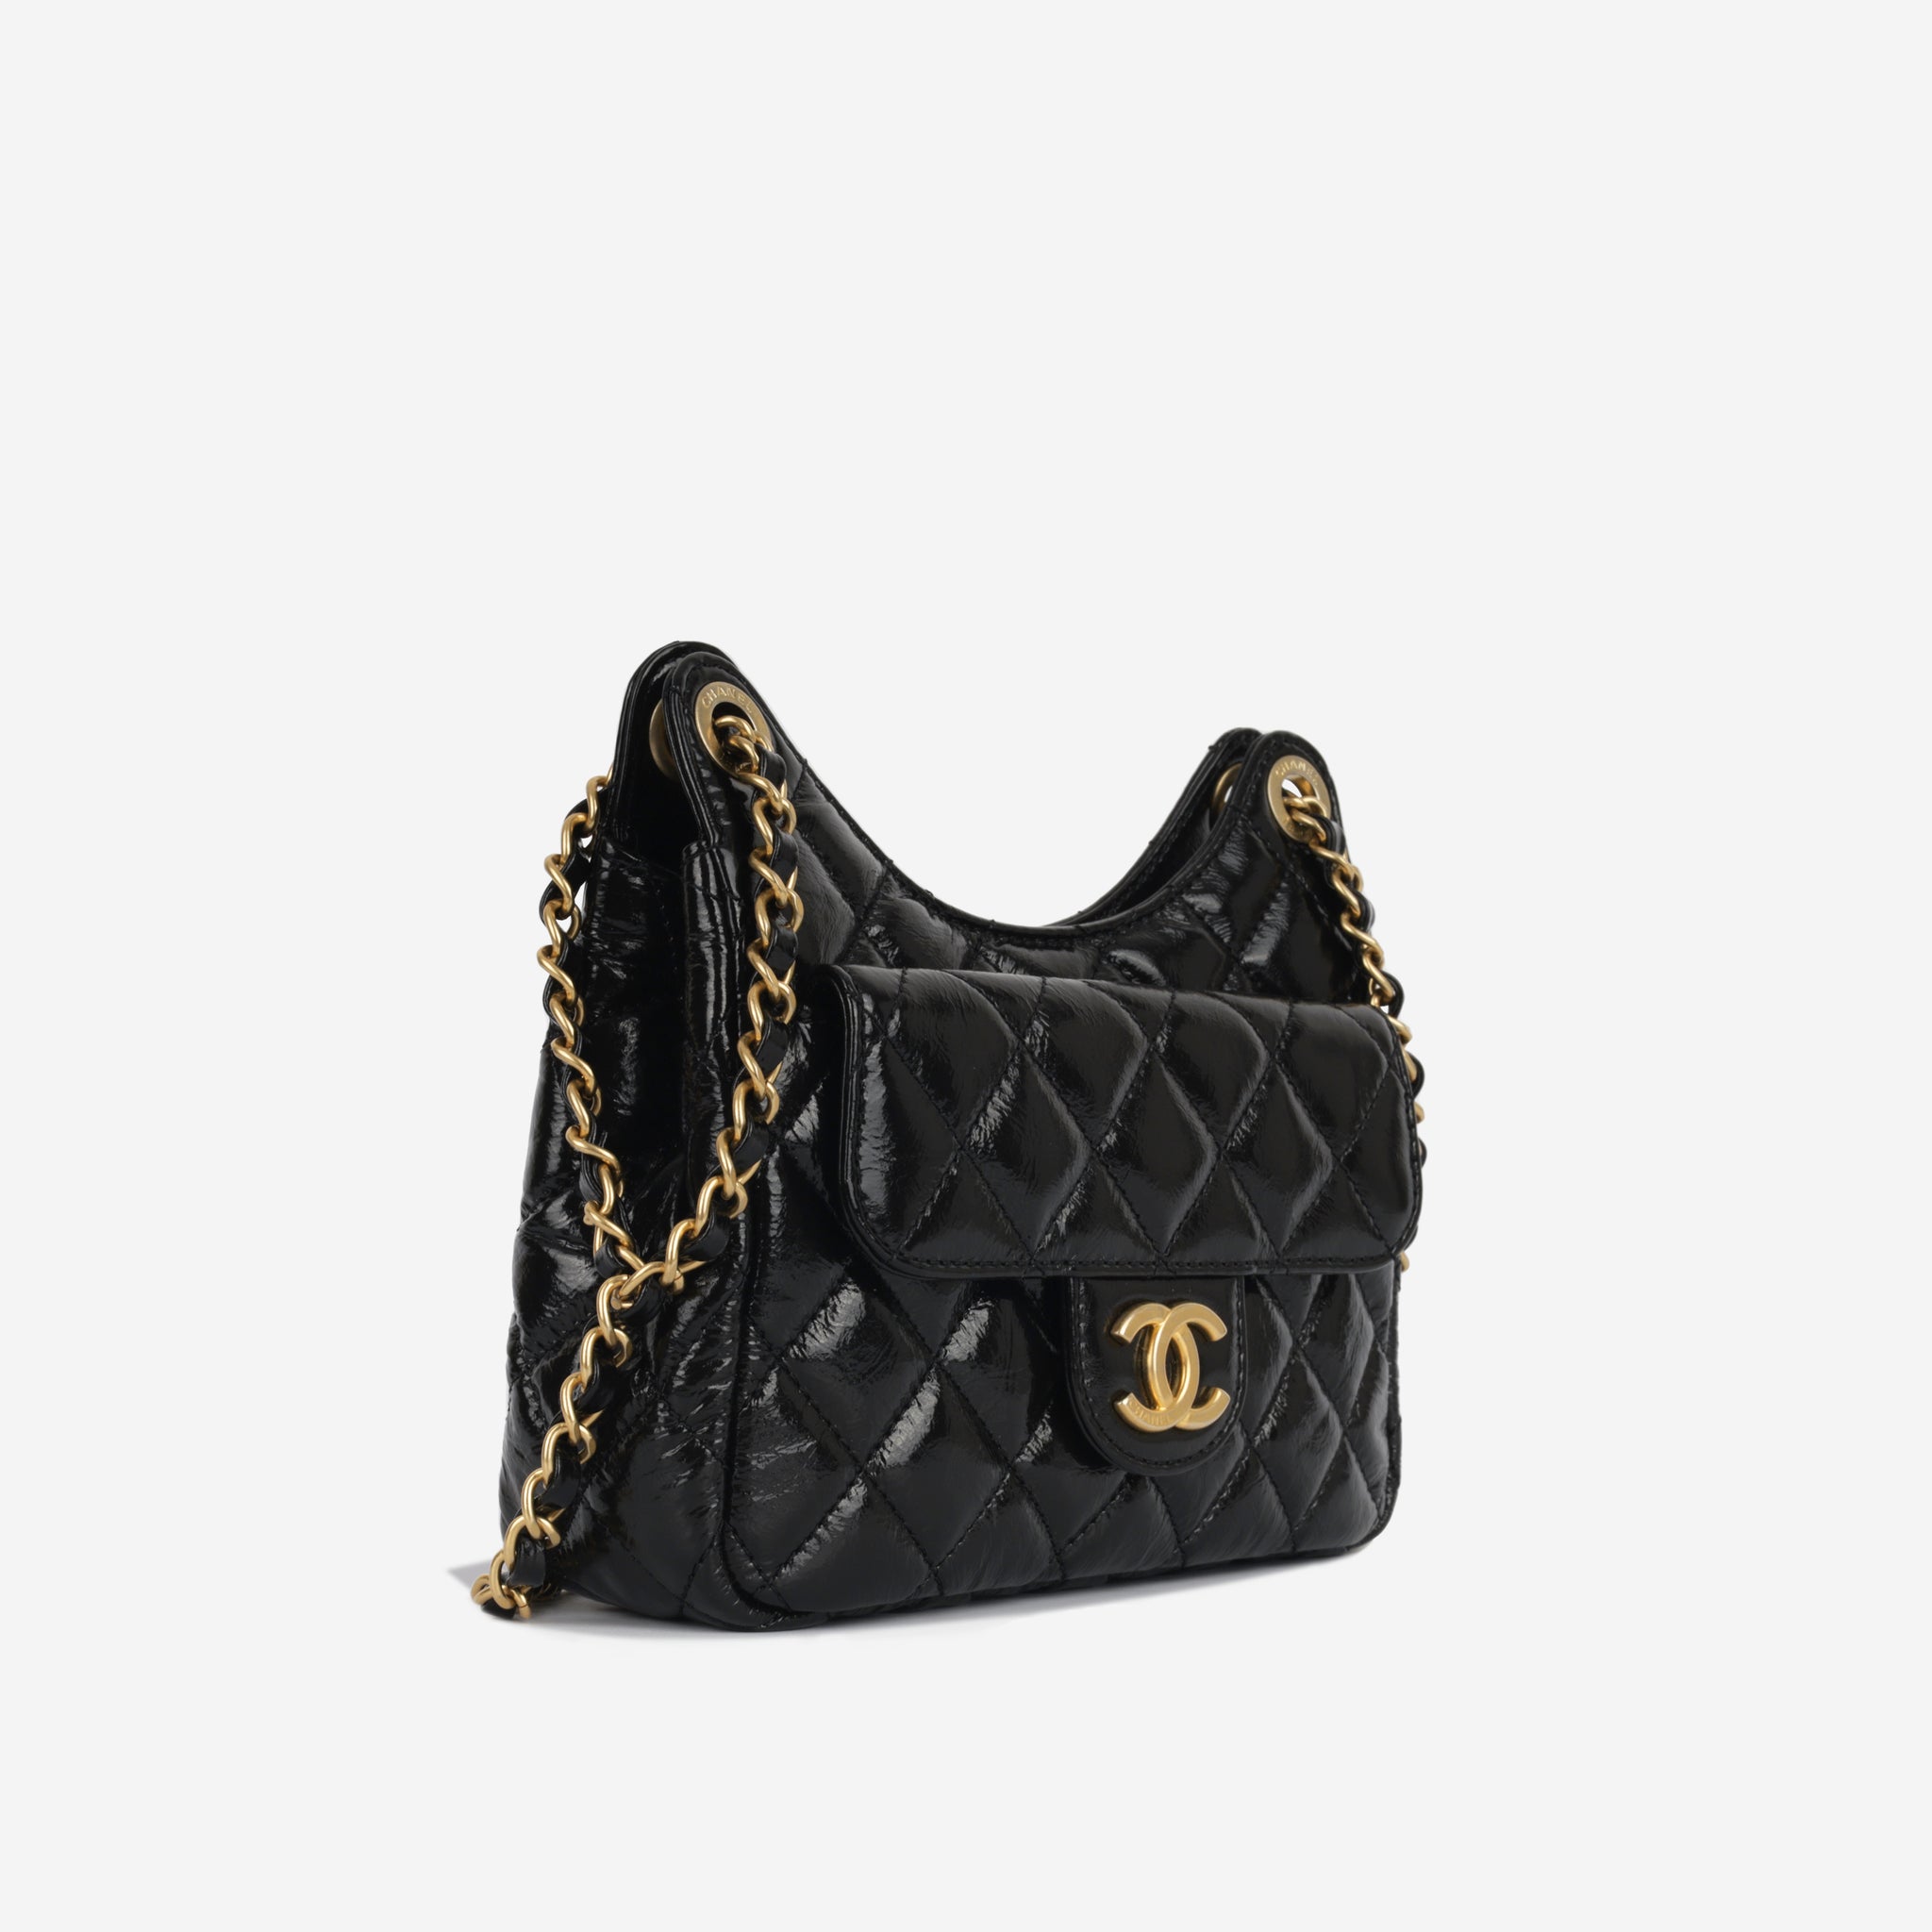 Chanel Gabrielle Small Hobo in Chevron Quilted Black Aged Calfskin - SOLD